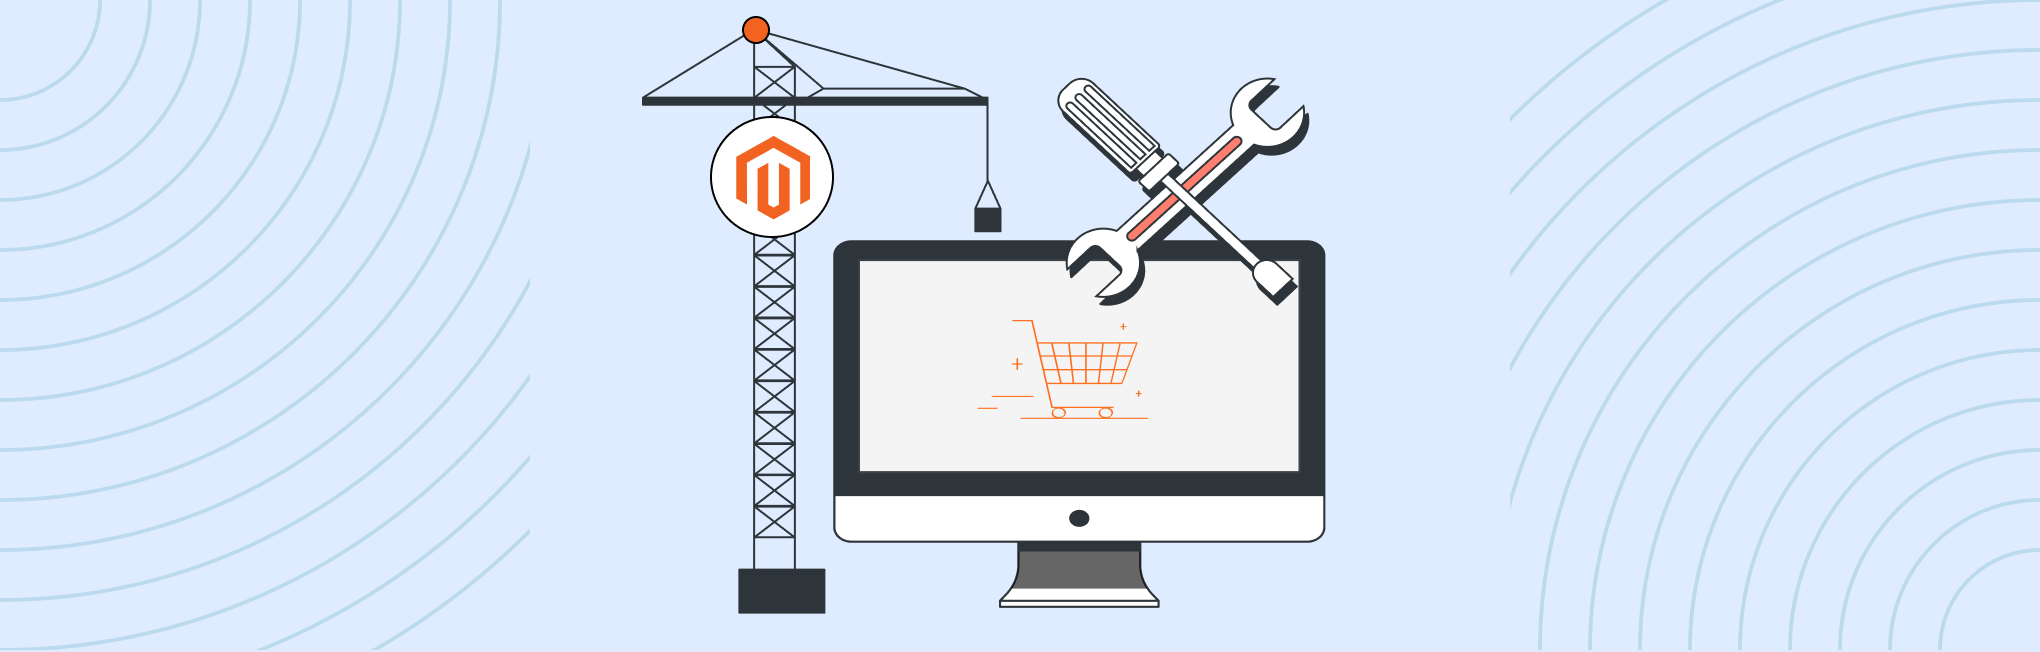 How to Build a Magento Website from Scratch in 11 Steps